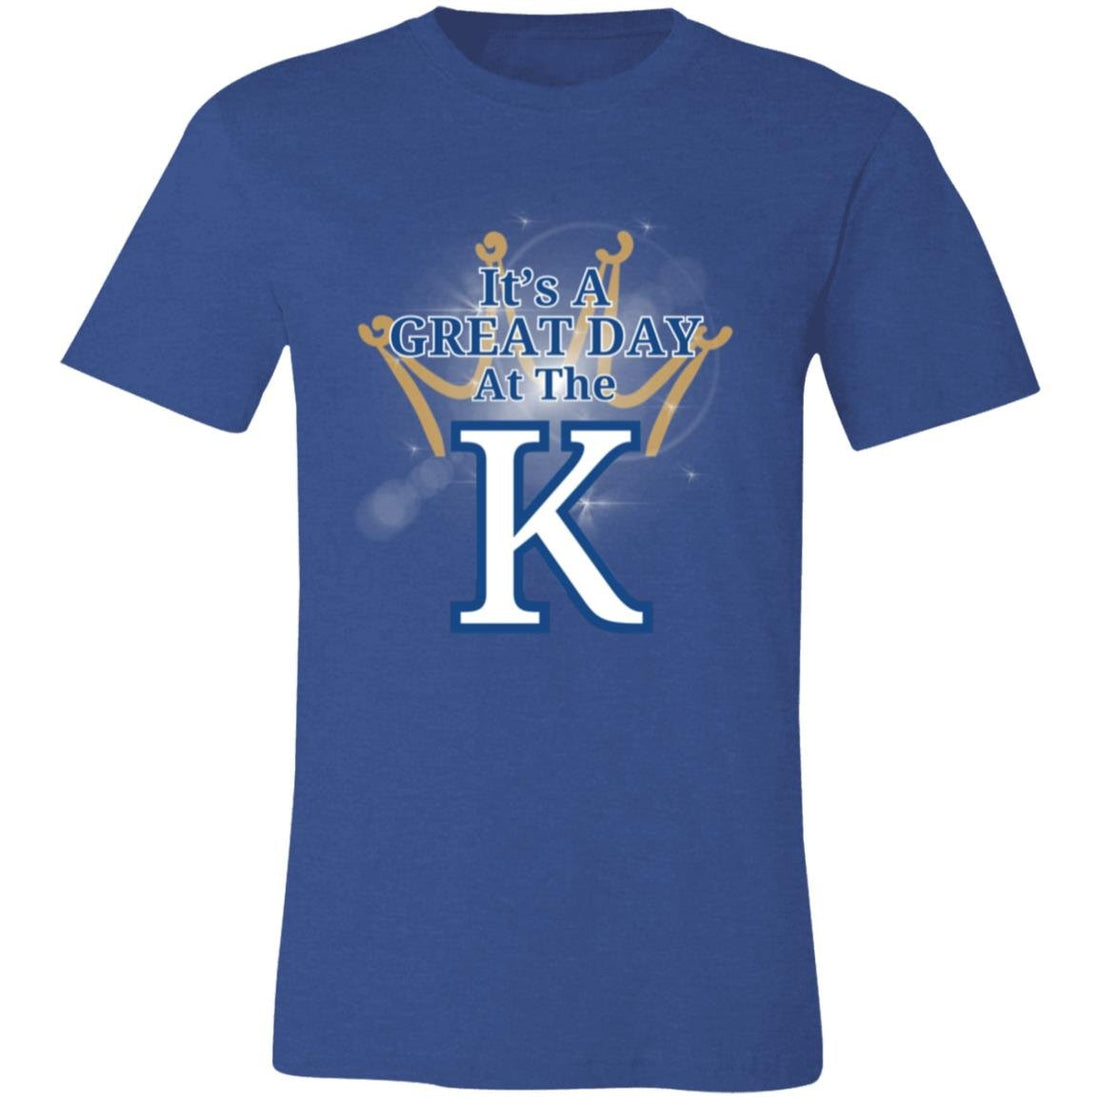 Great Day @ K T-Shirt - T-Shirts - Positively Sassy - Great Day @ K T-Shirt